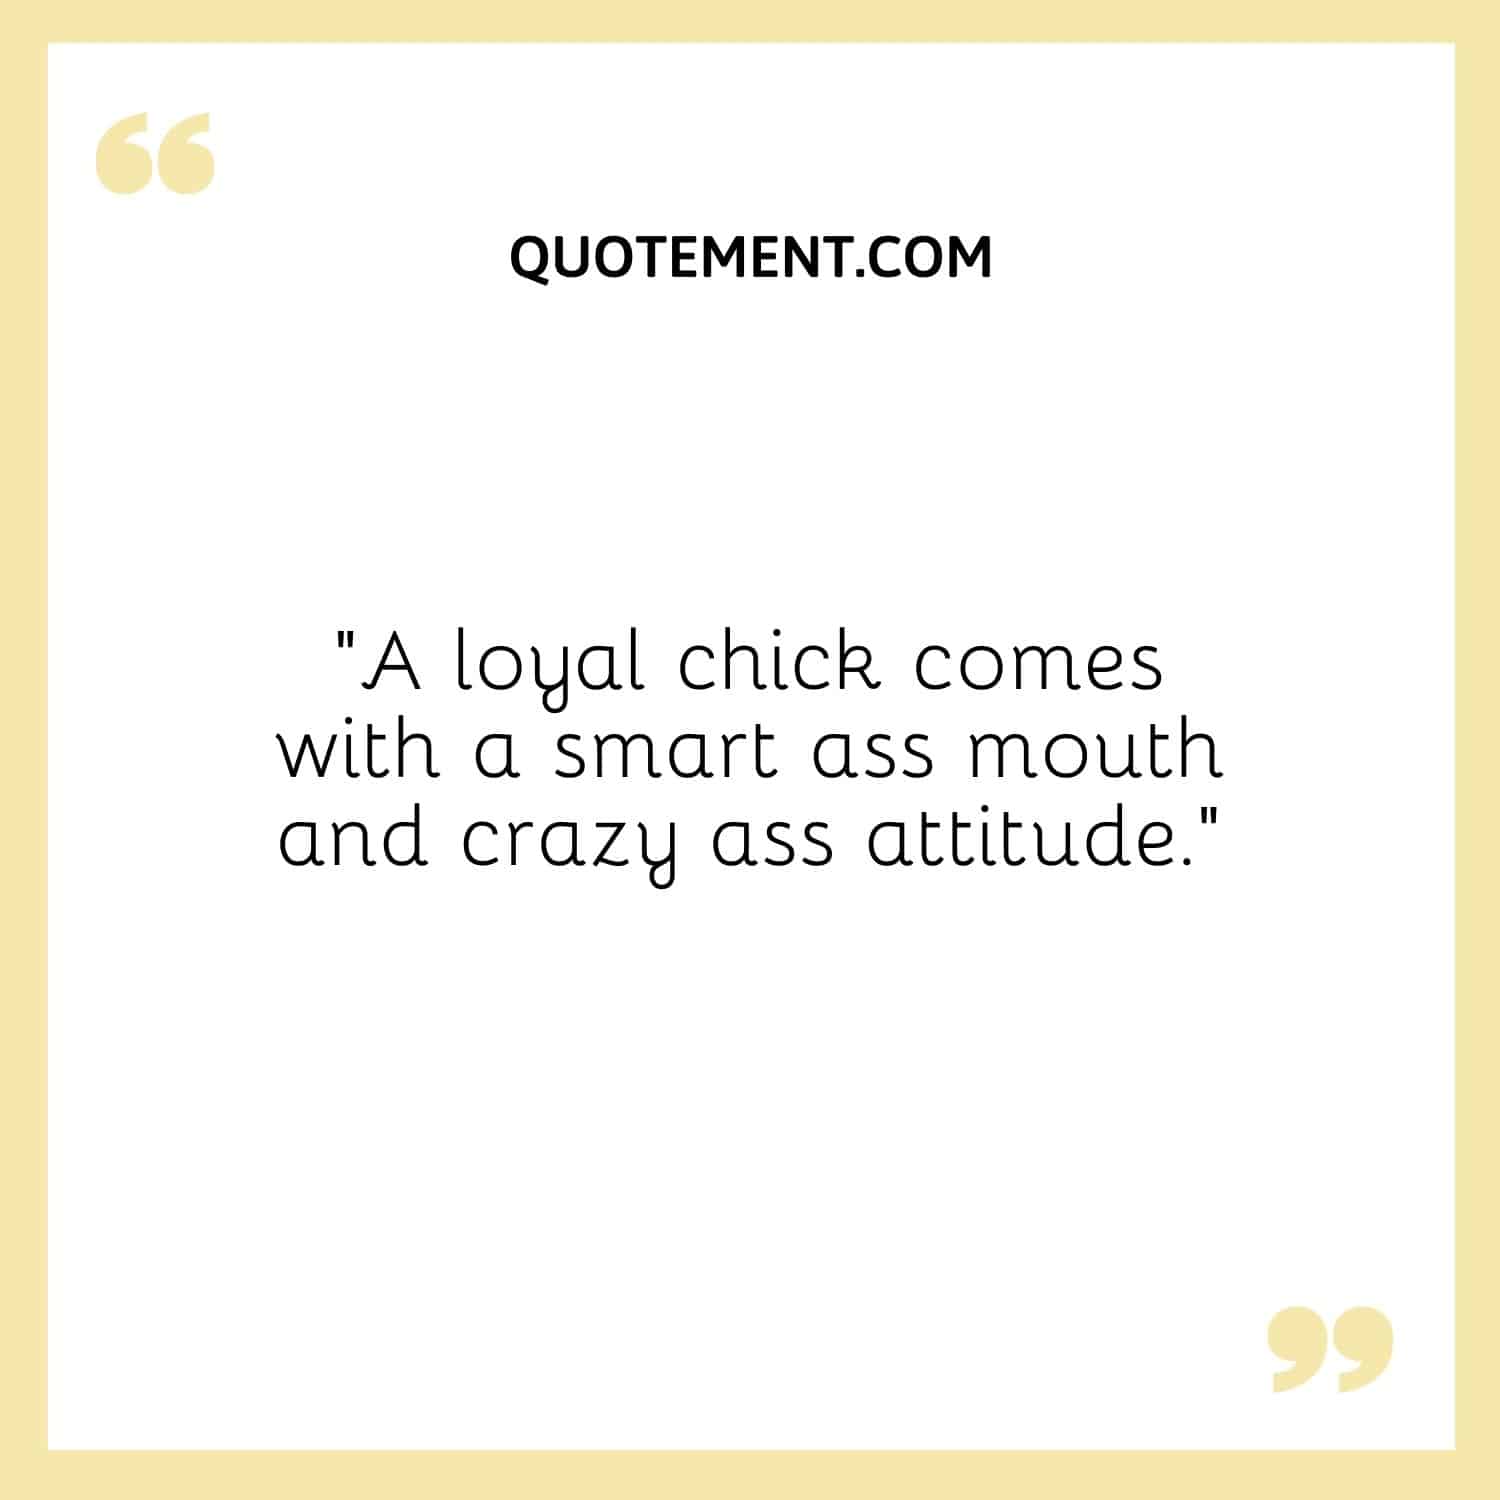 A loyal chick comes with a smart ass mouth and crazy ass attitude.